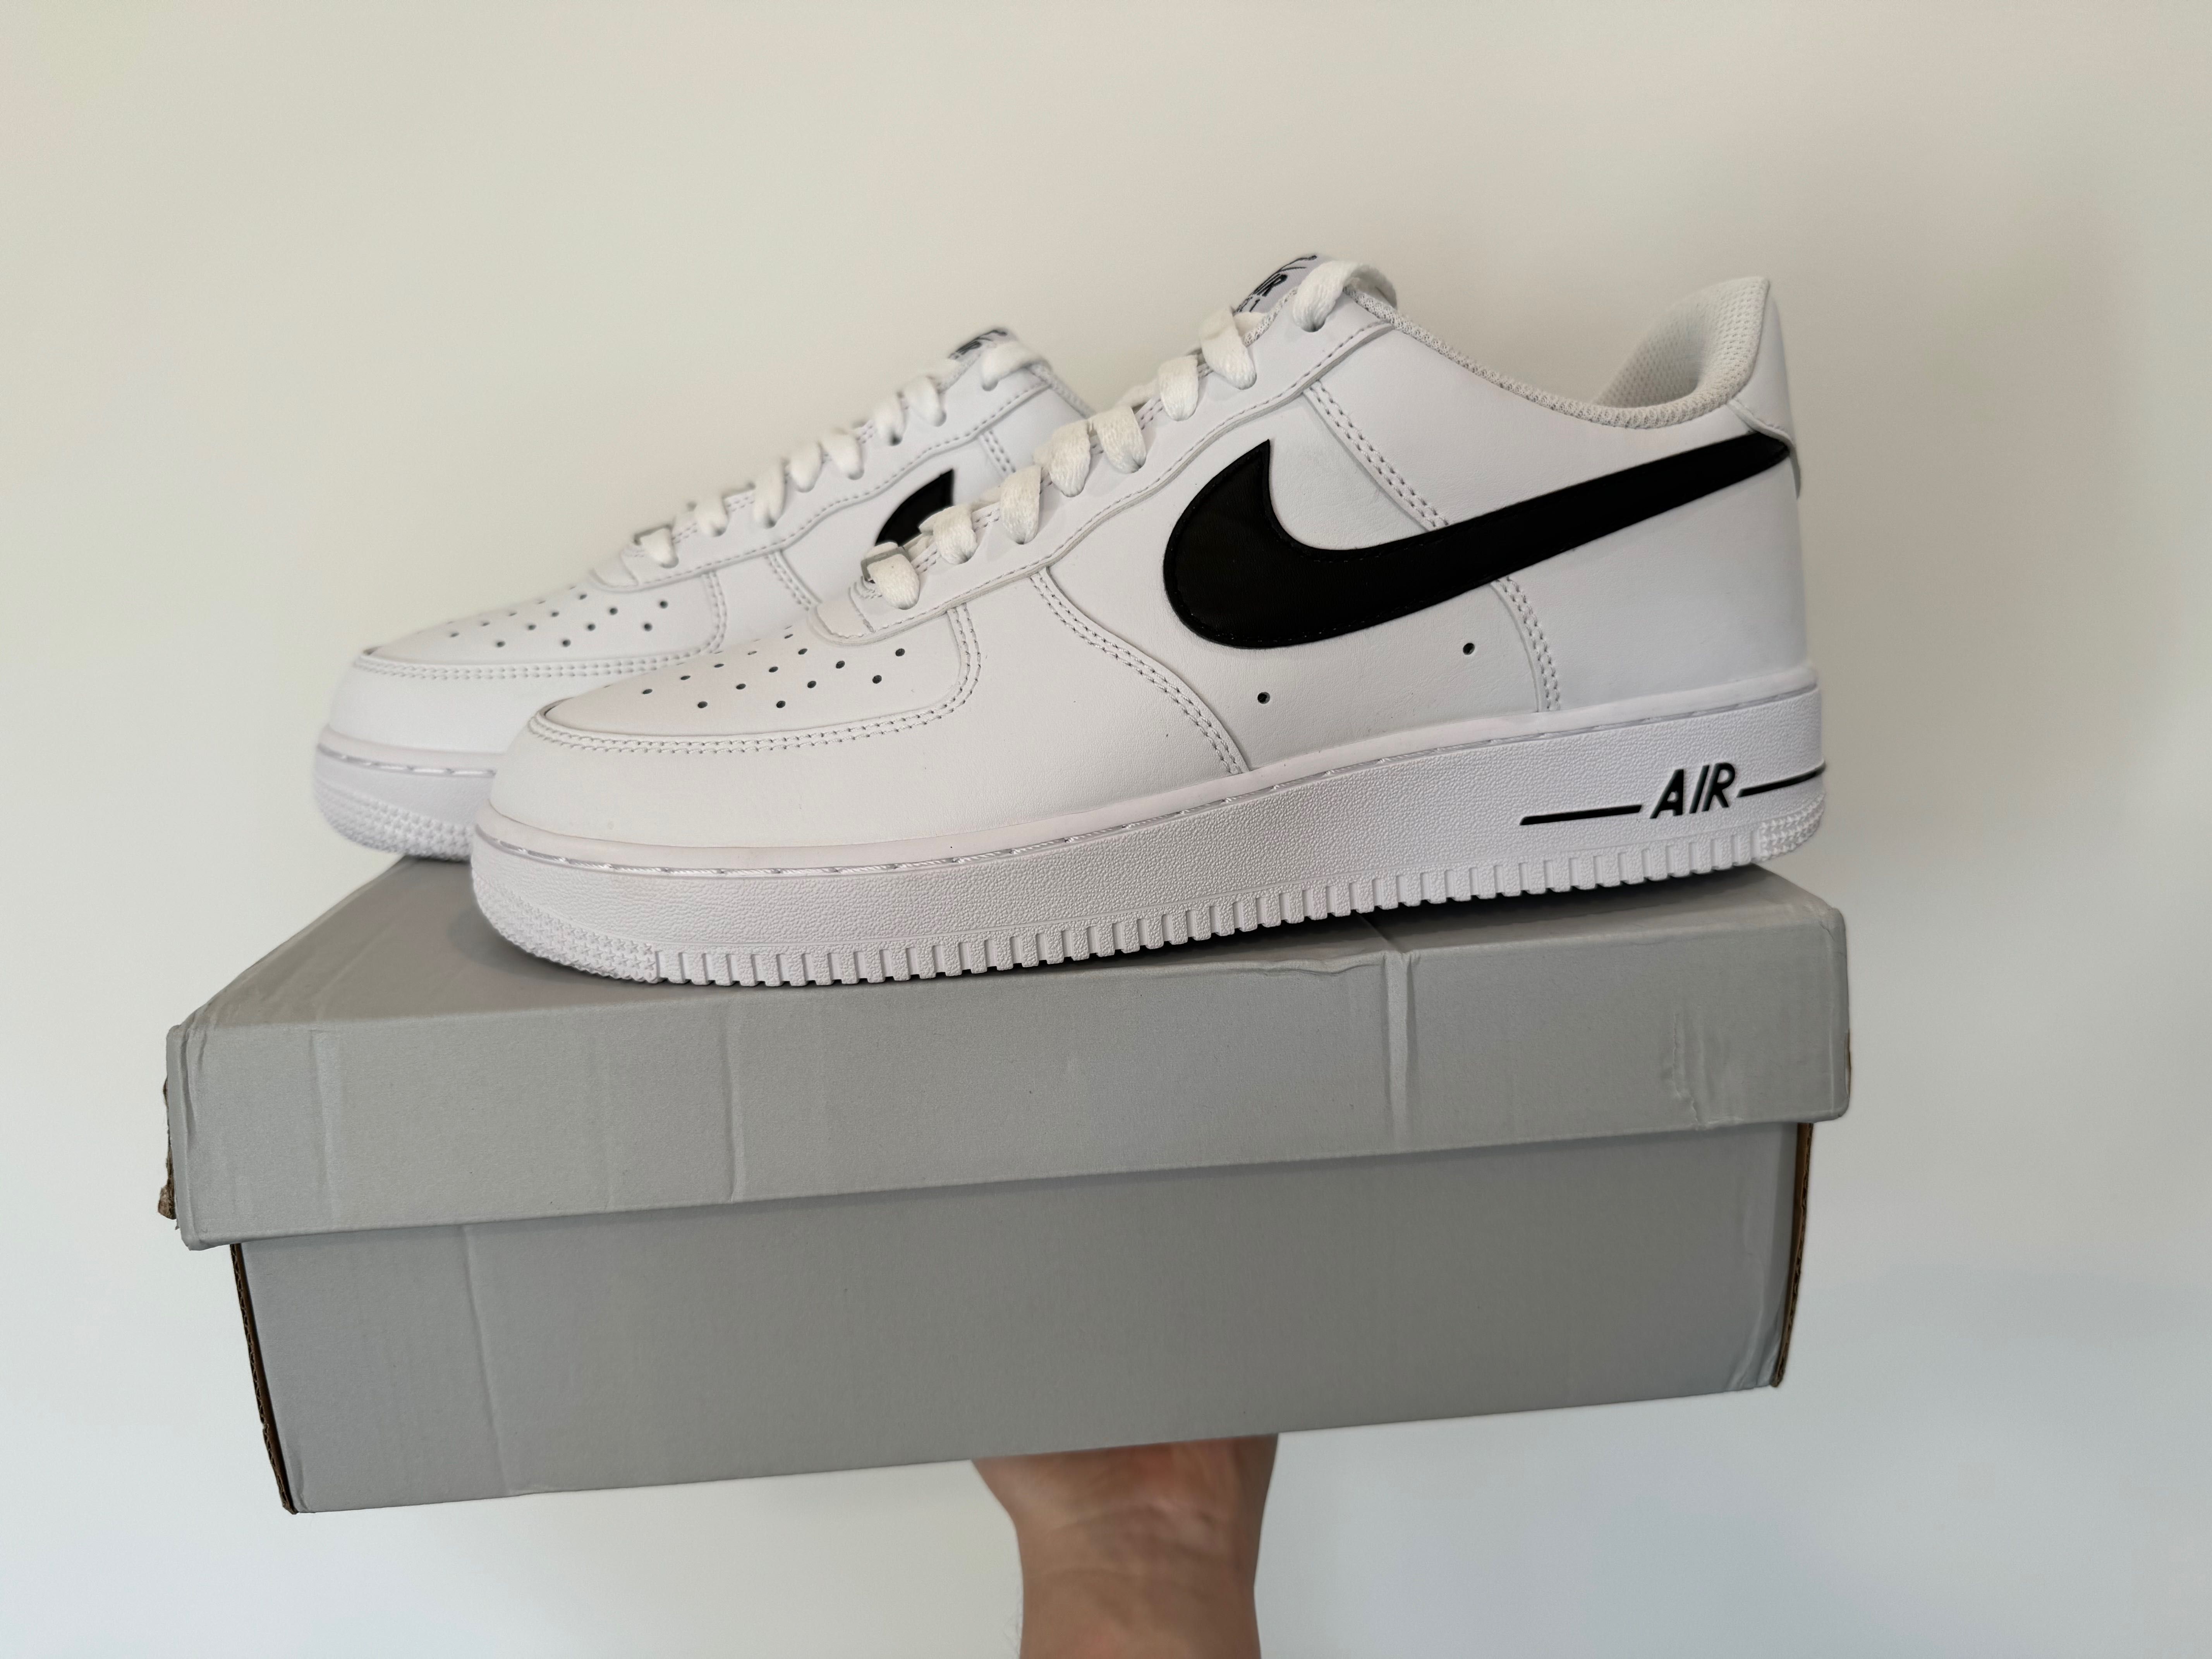 Buty Nike Air Force 1 Low '07 White Black r. 45